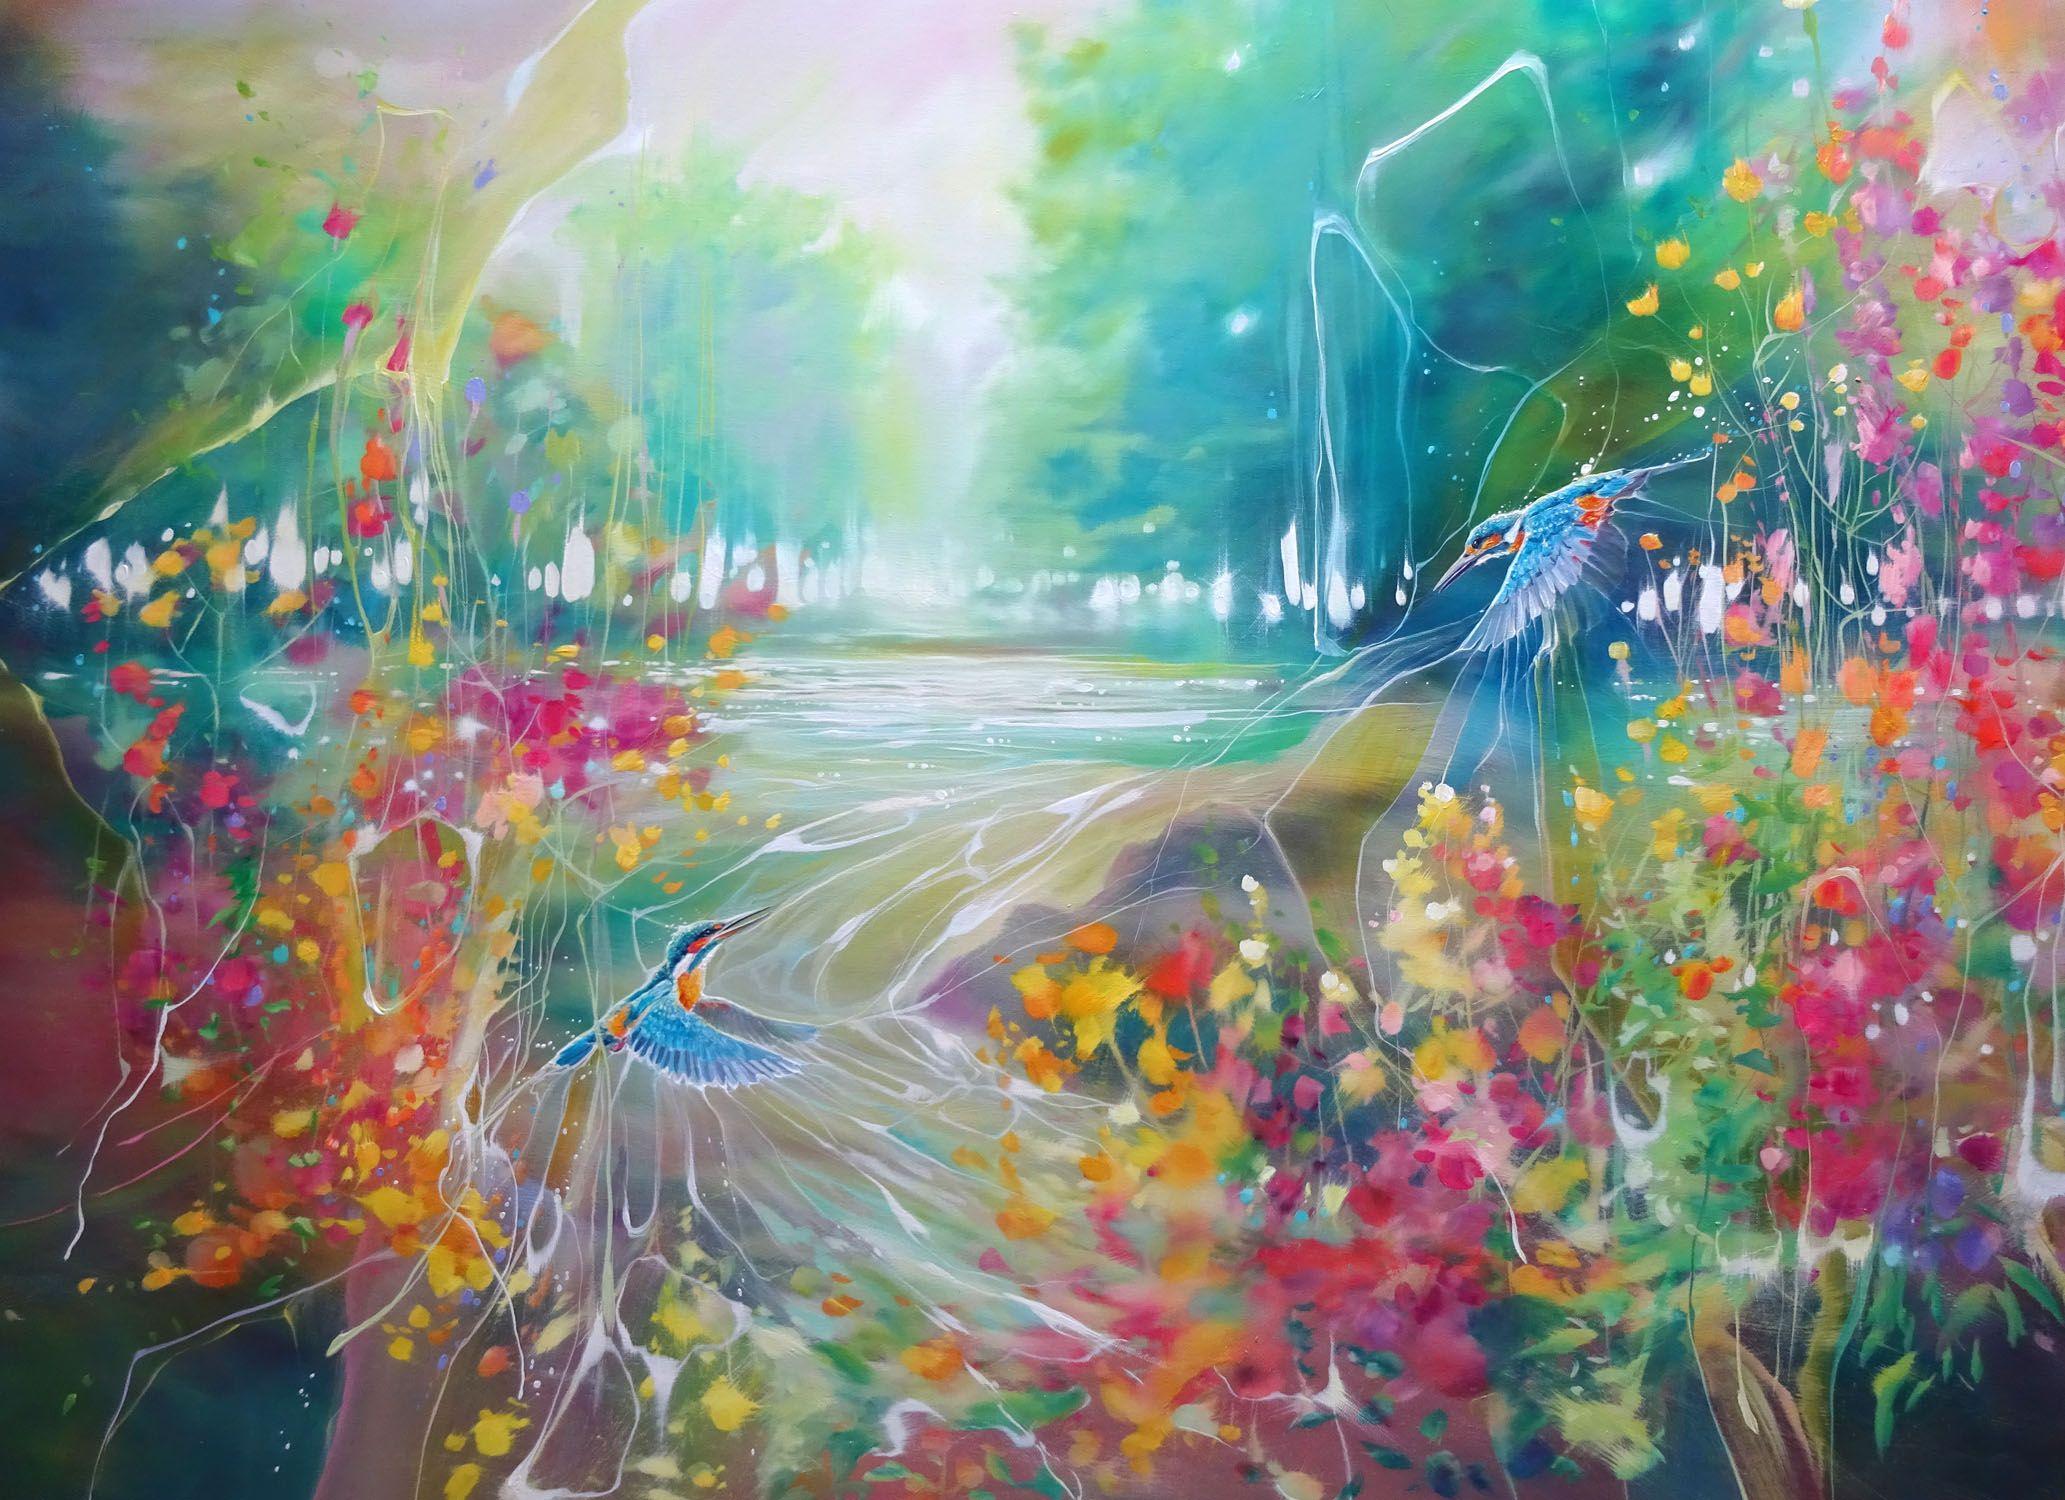 The Enchanted is a very large oil painting of a river bank with wildflowers and kingfishers on an English summer day in the countryside. It is 36x60x1.5 inches and was inspired by a June walk along the river Adur near Amberley (postcode BN18 9LR).